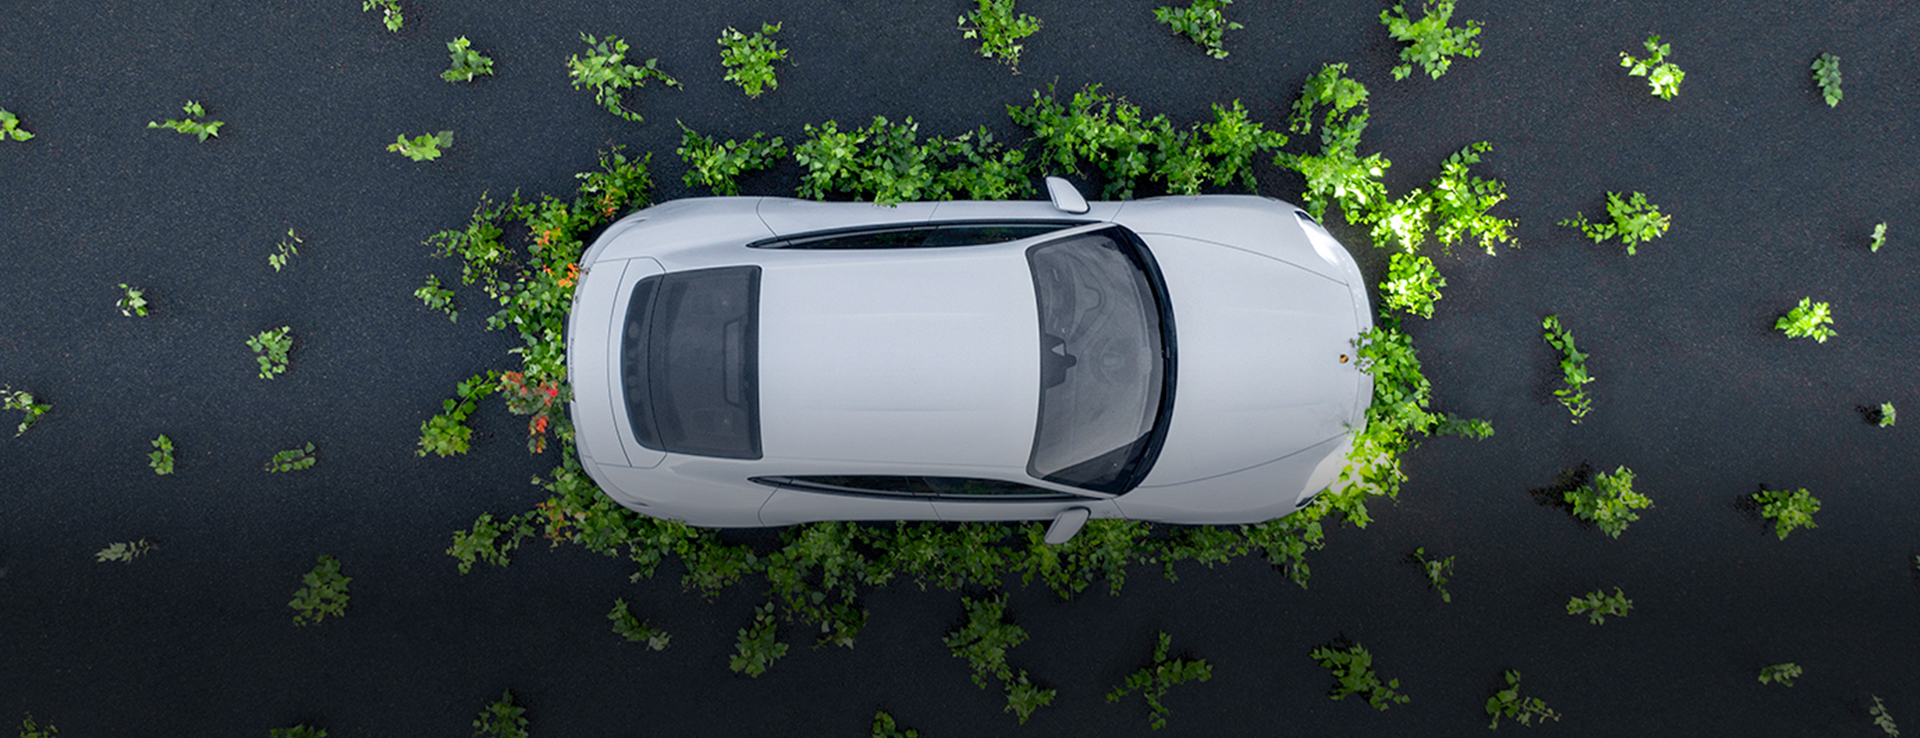 Aerial image Porsche Taycan car surrounded by trees headlights on